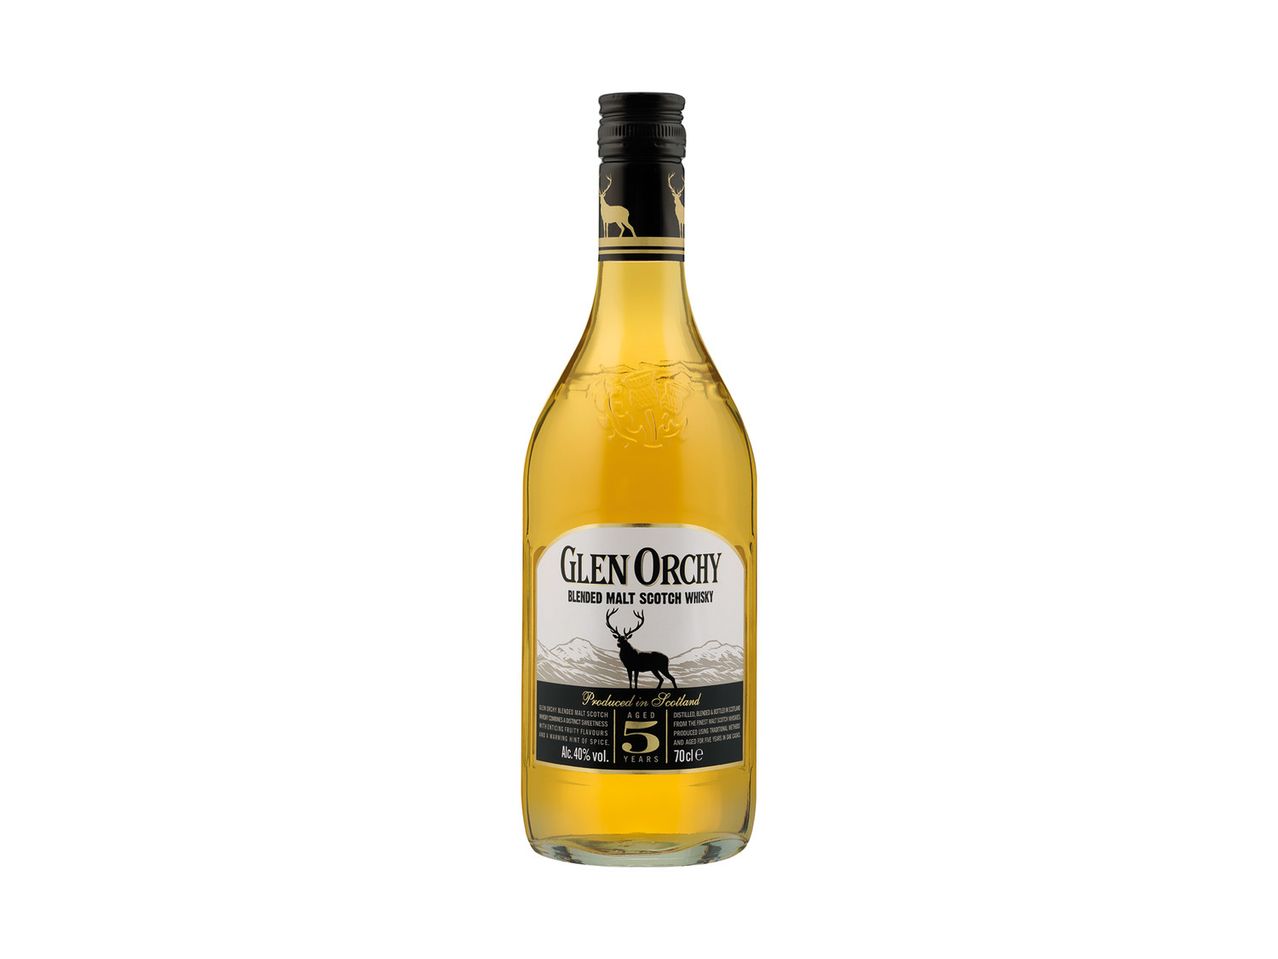 Go to full screen view: Glen Orchy 5 Year Blended Malt Scotch Whisky - Image 1